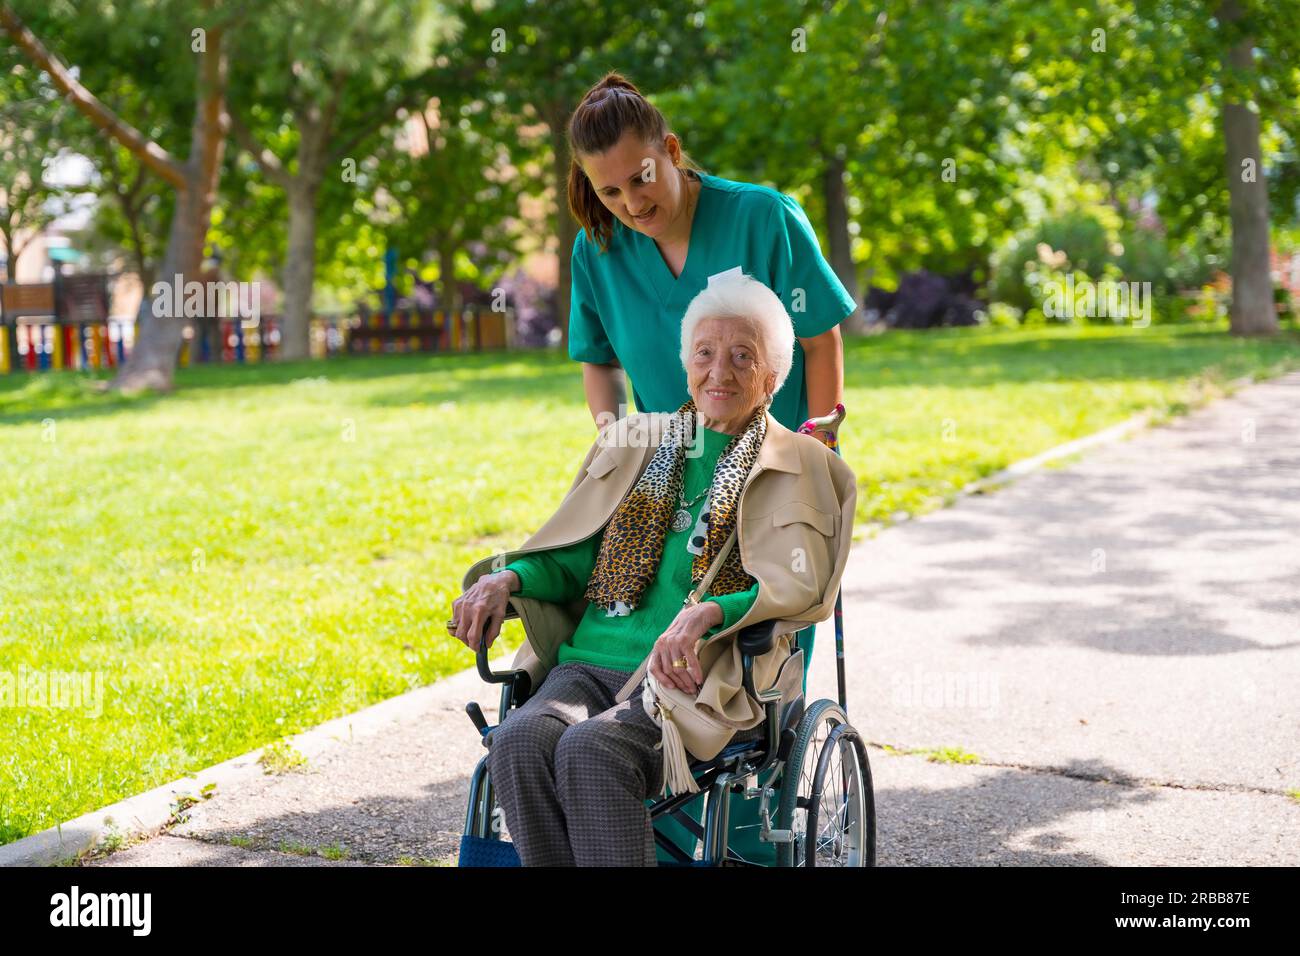 An elderly woman with the nurse on a walk through the garden of a nursing home in a wheelchair next to nature and trees Stock Photo